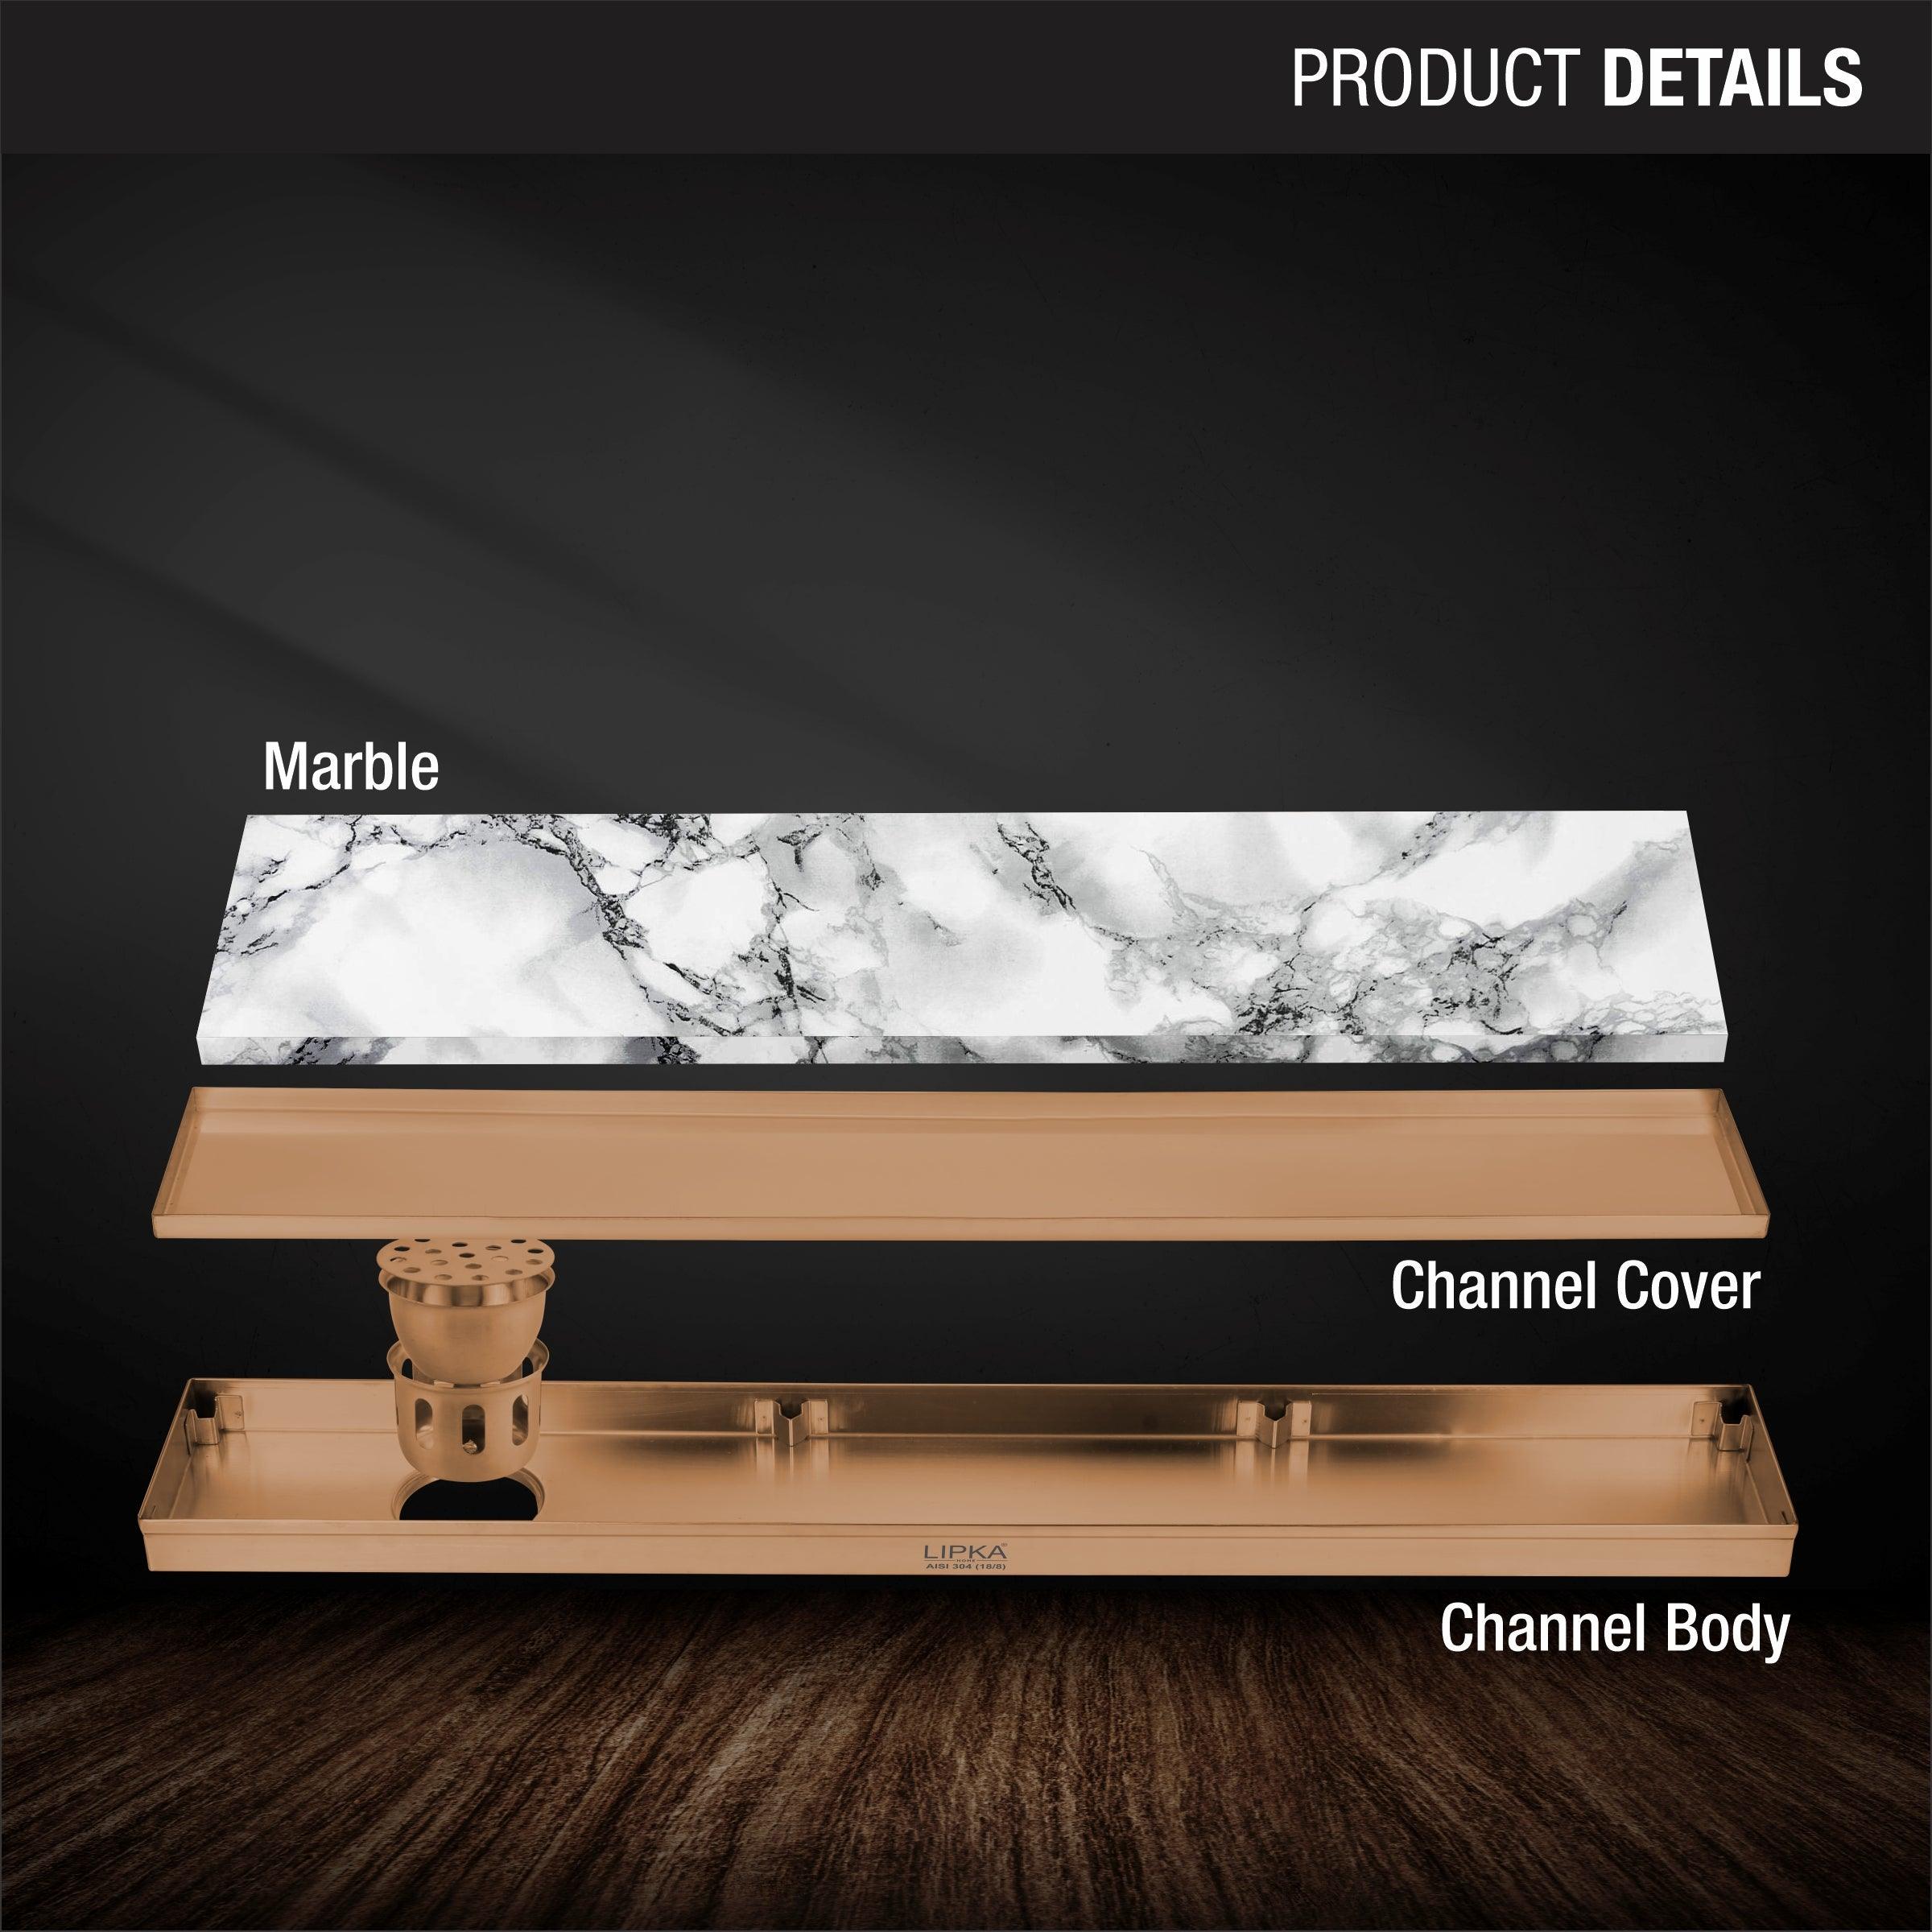 Marble Insert Shower Drain Channel - Antique Copper (48 x 4 Inches) product details